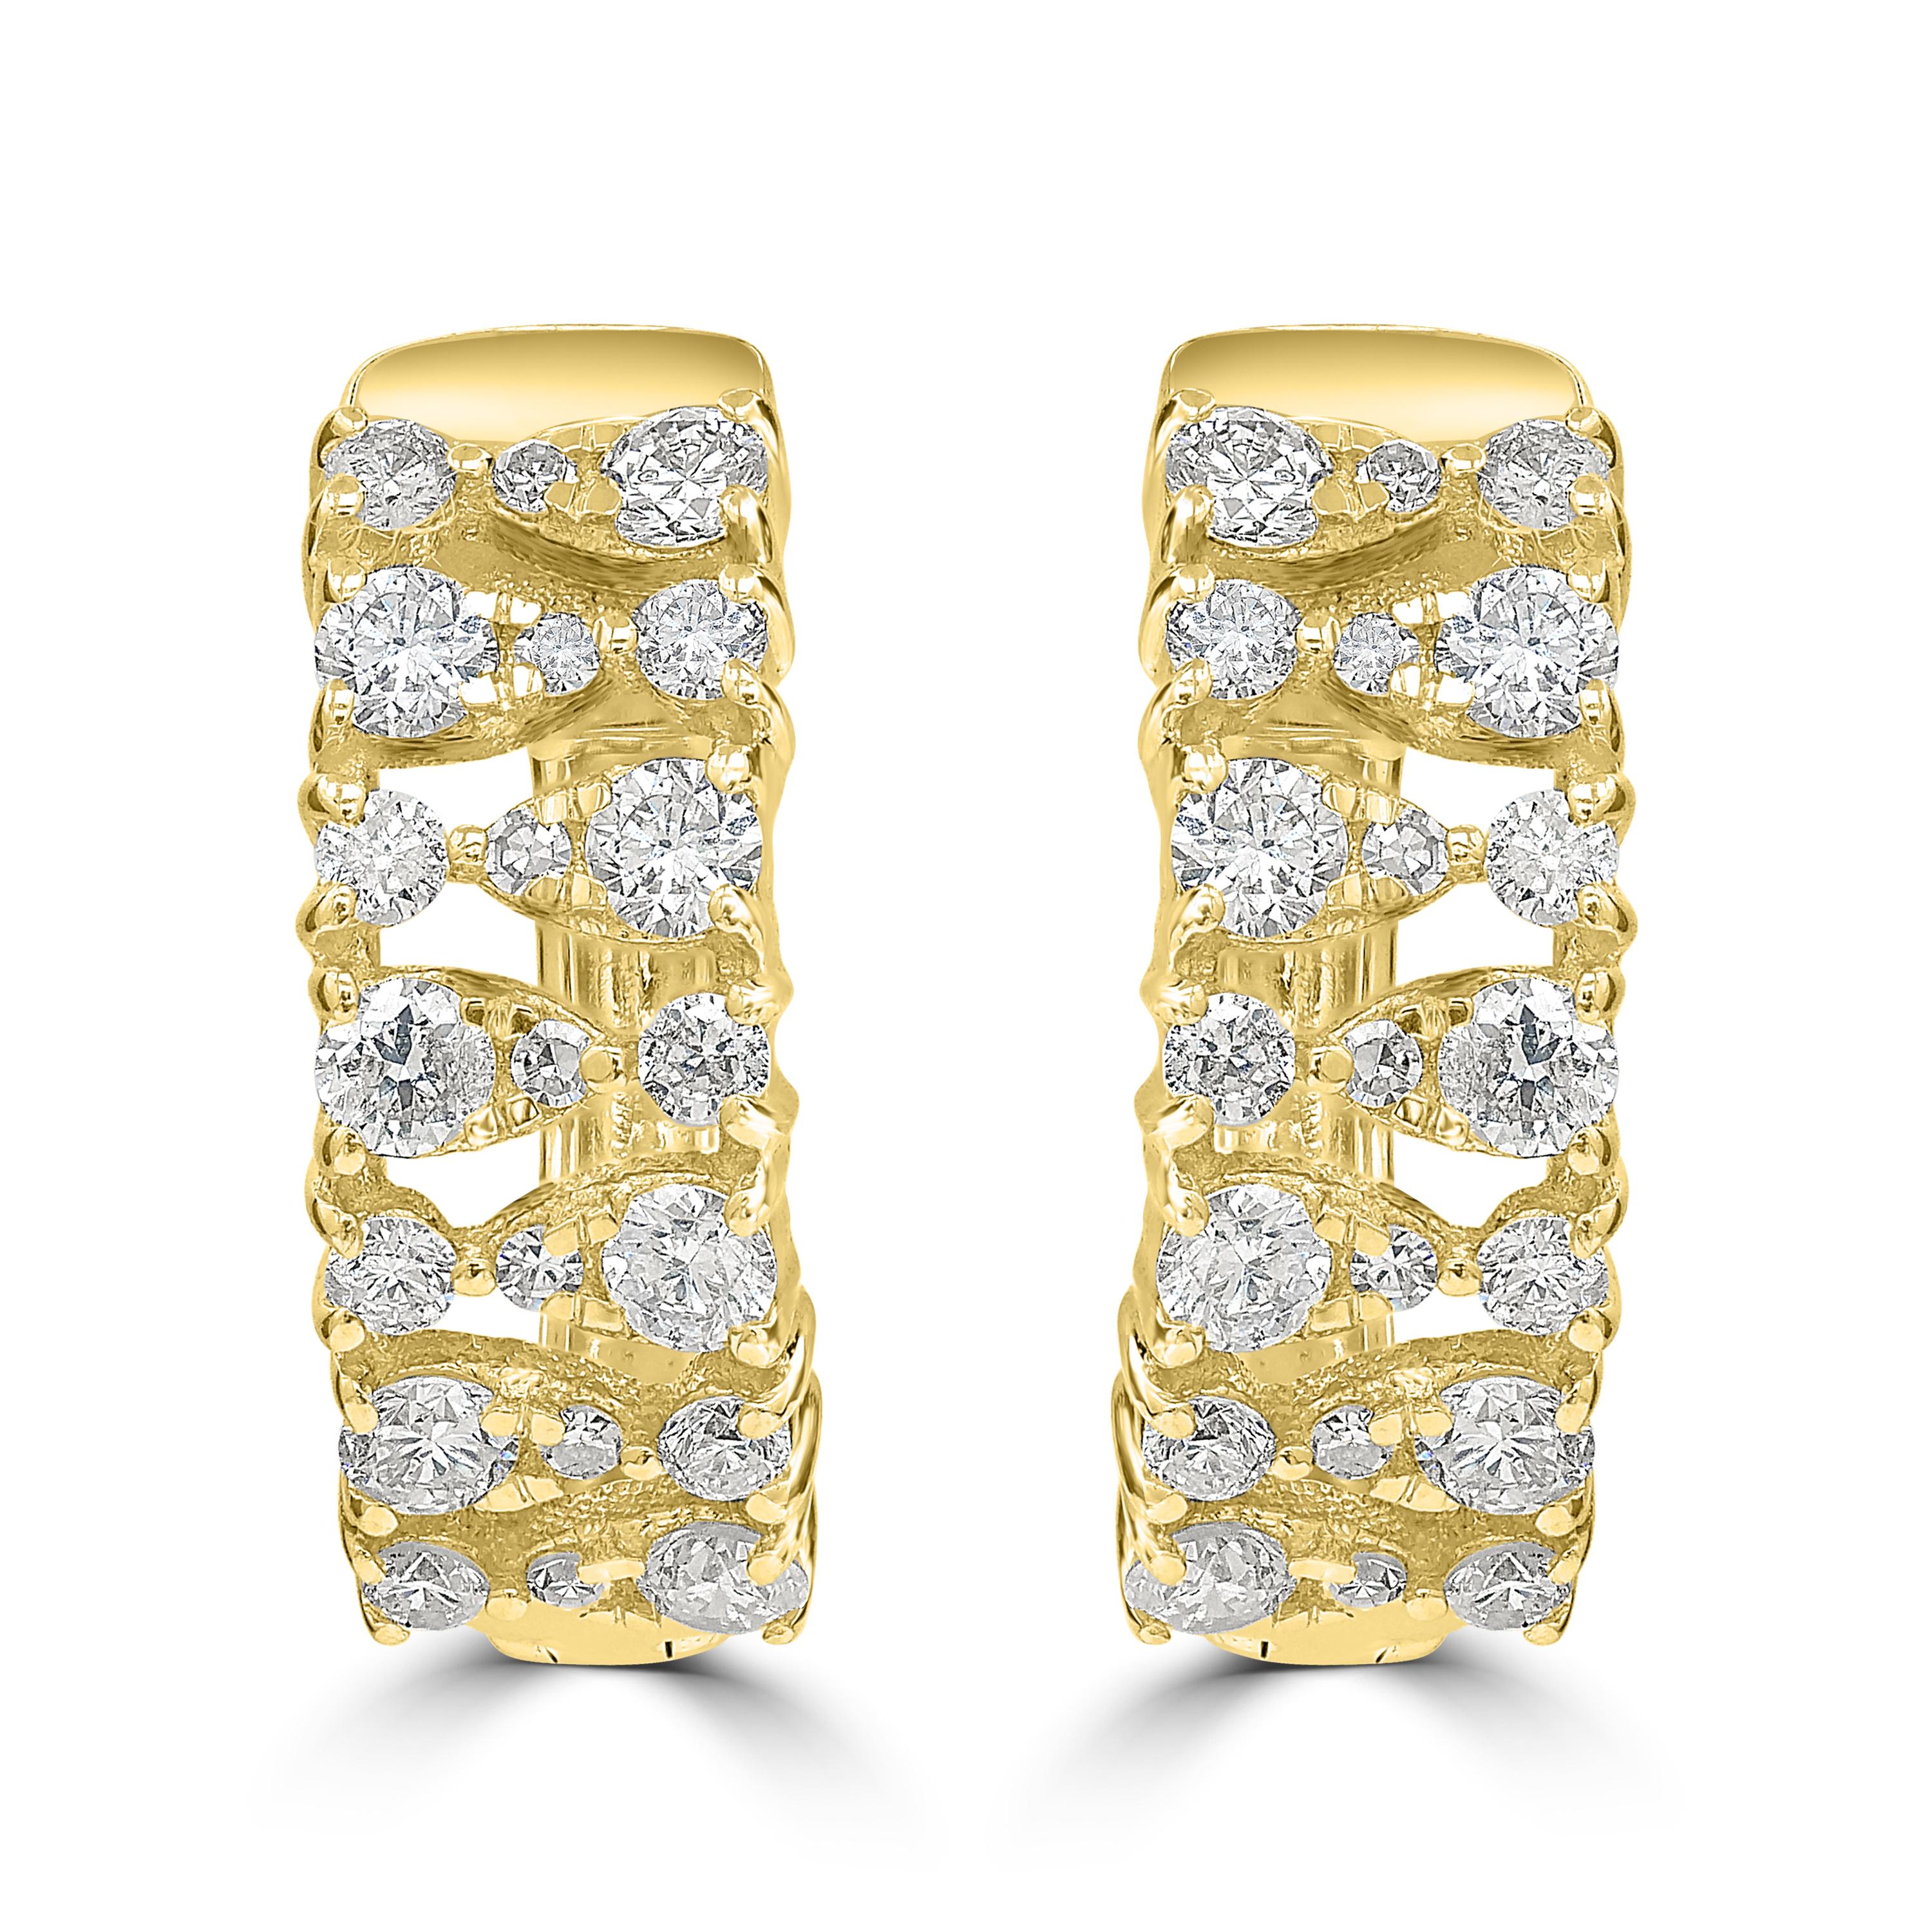 A timeless design in 14K Yellow Gold with a flowing stream of brilliance. These lobe-hugging hoop earrings include 0.52 carat round diamonds set in a dispersed design. These click it earrings are both comfortable and elegant.
Please follow the